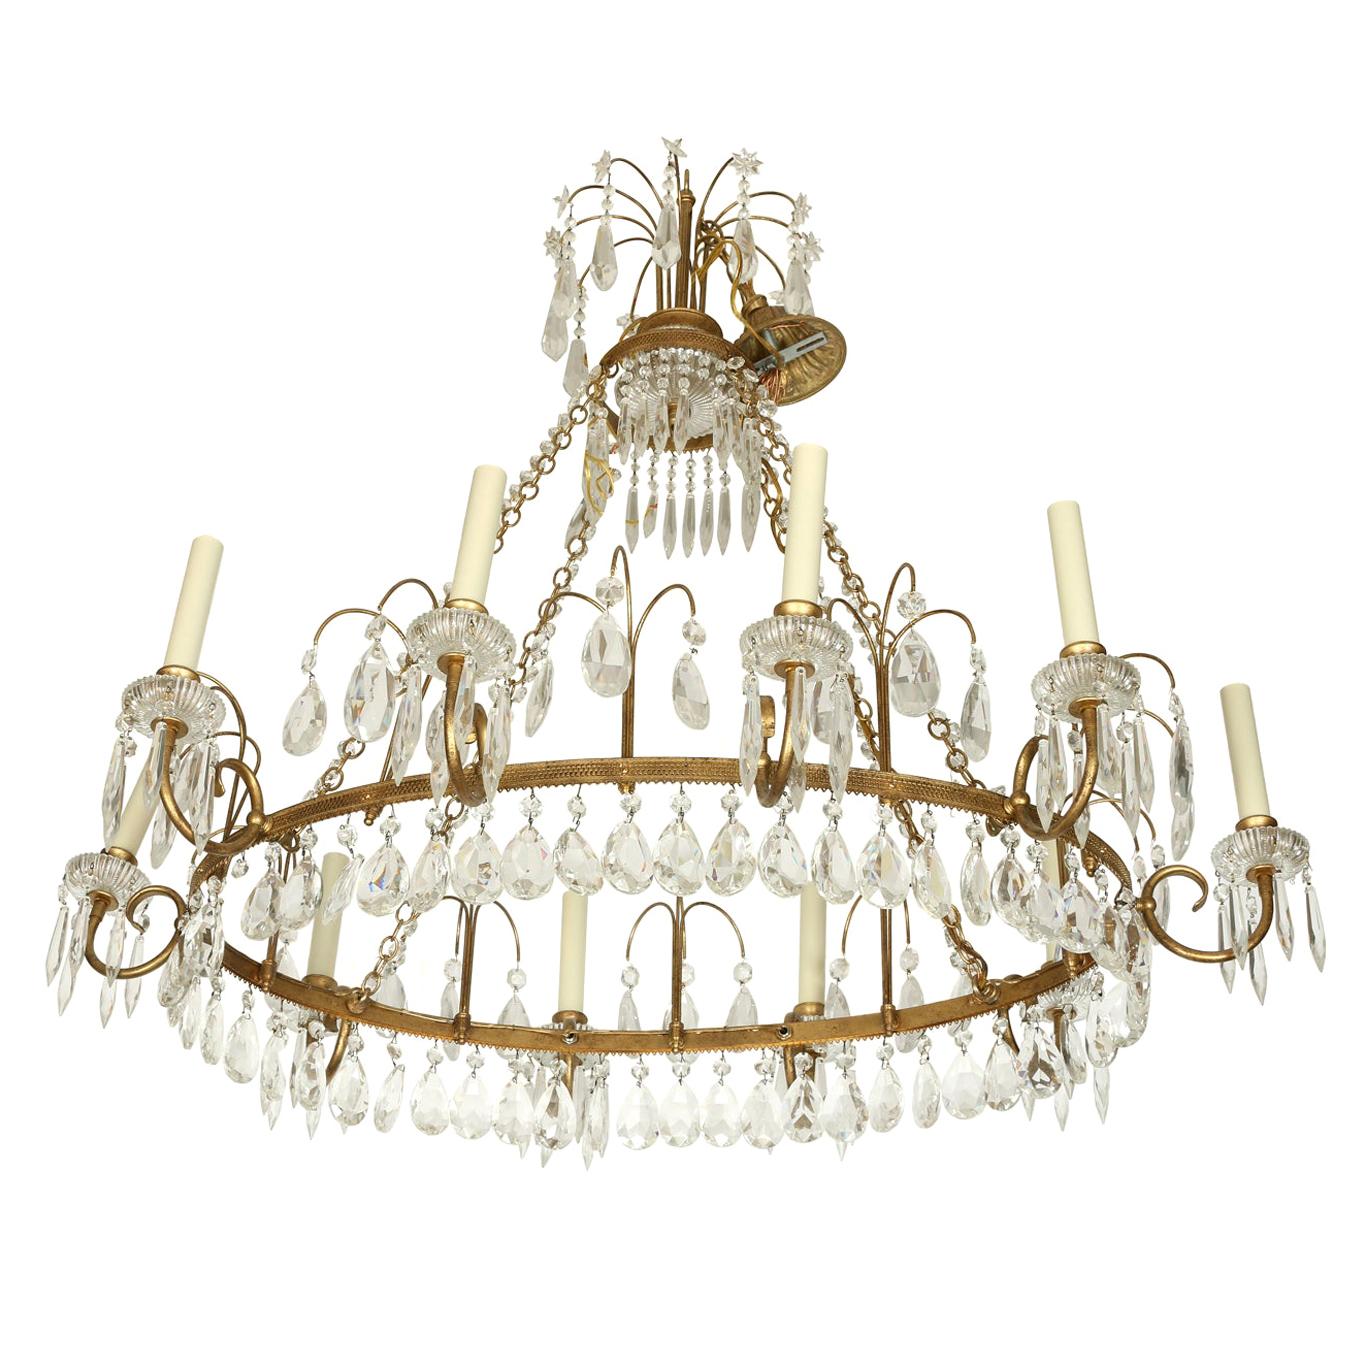 Antique Baltic Gilt Metal and Crystal Ten-Arm Chandelier